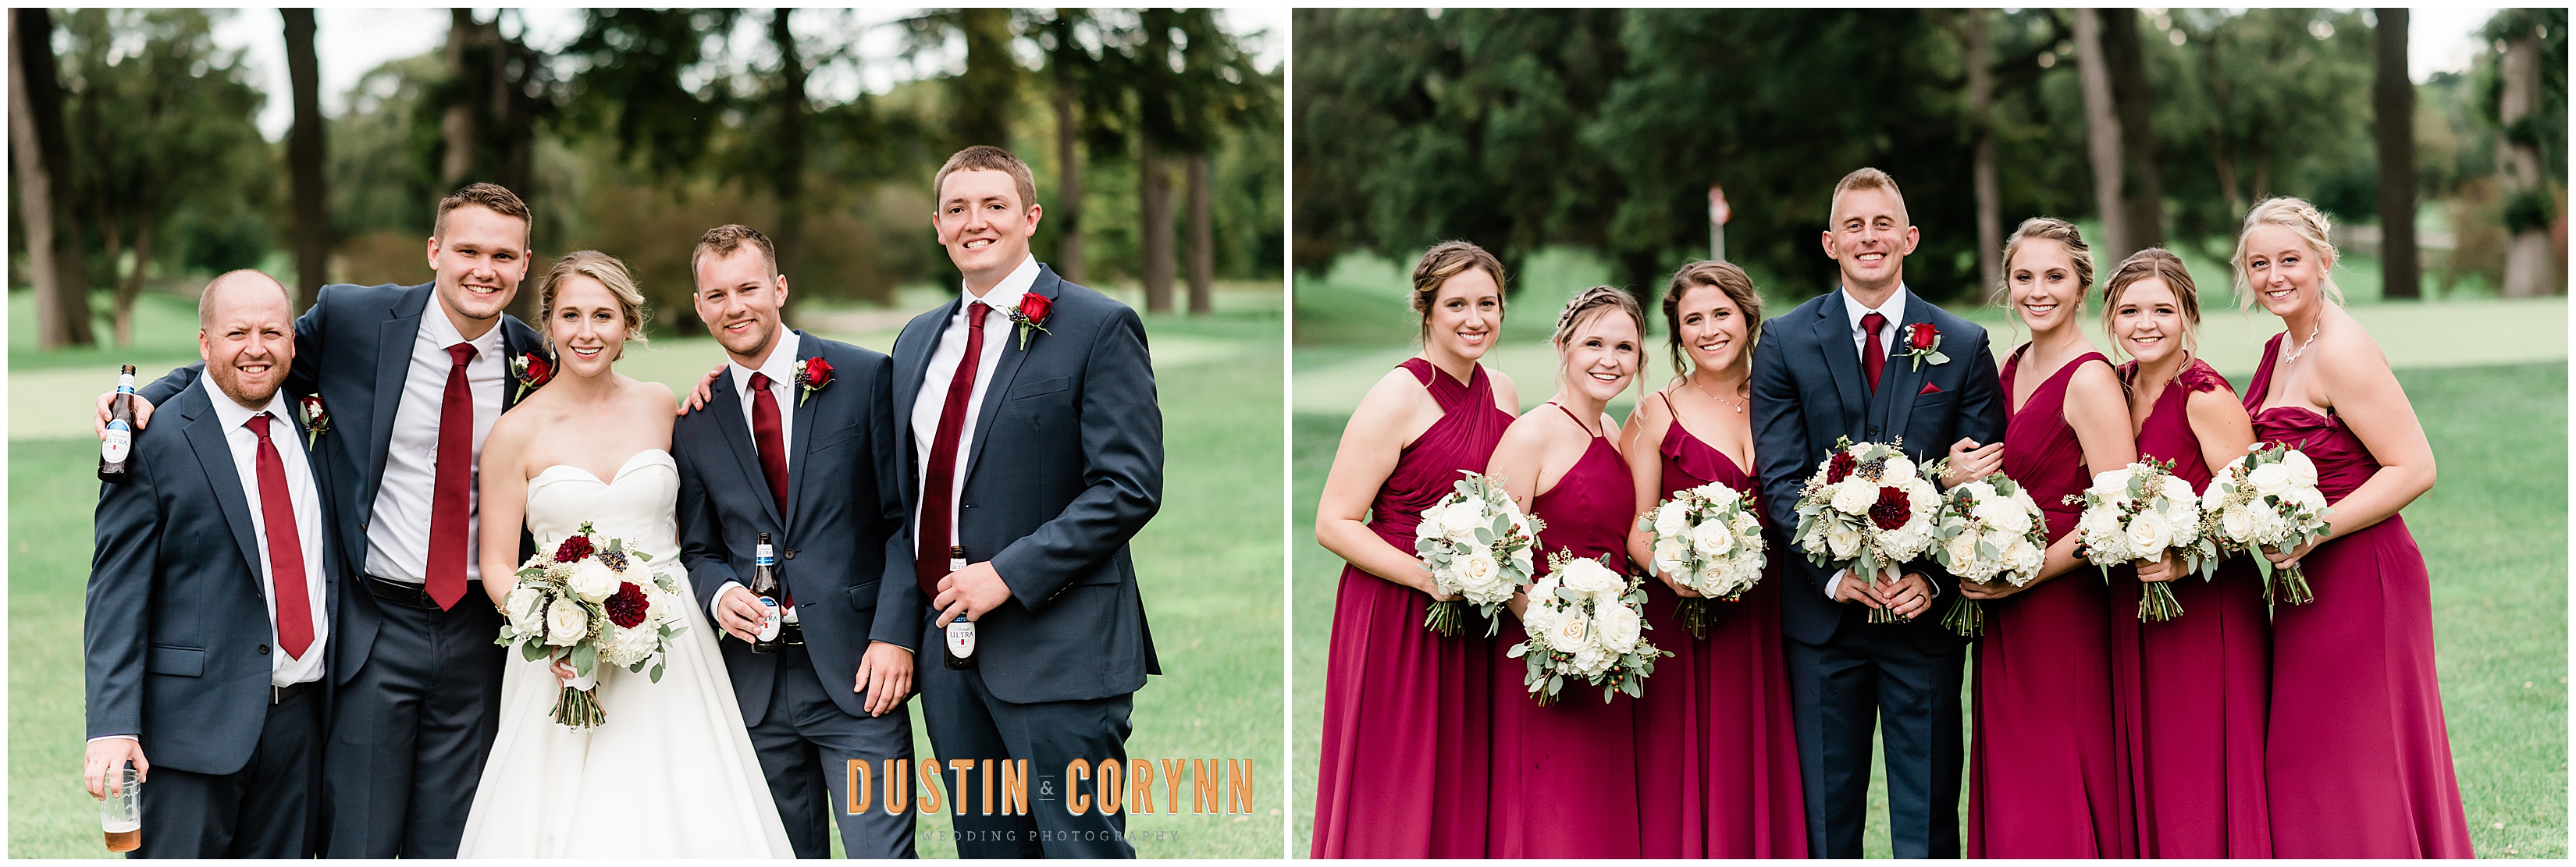 Wedding Party Portraits at Fort Wayne Country Club